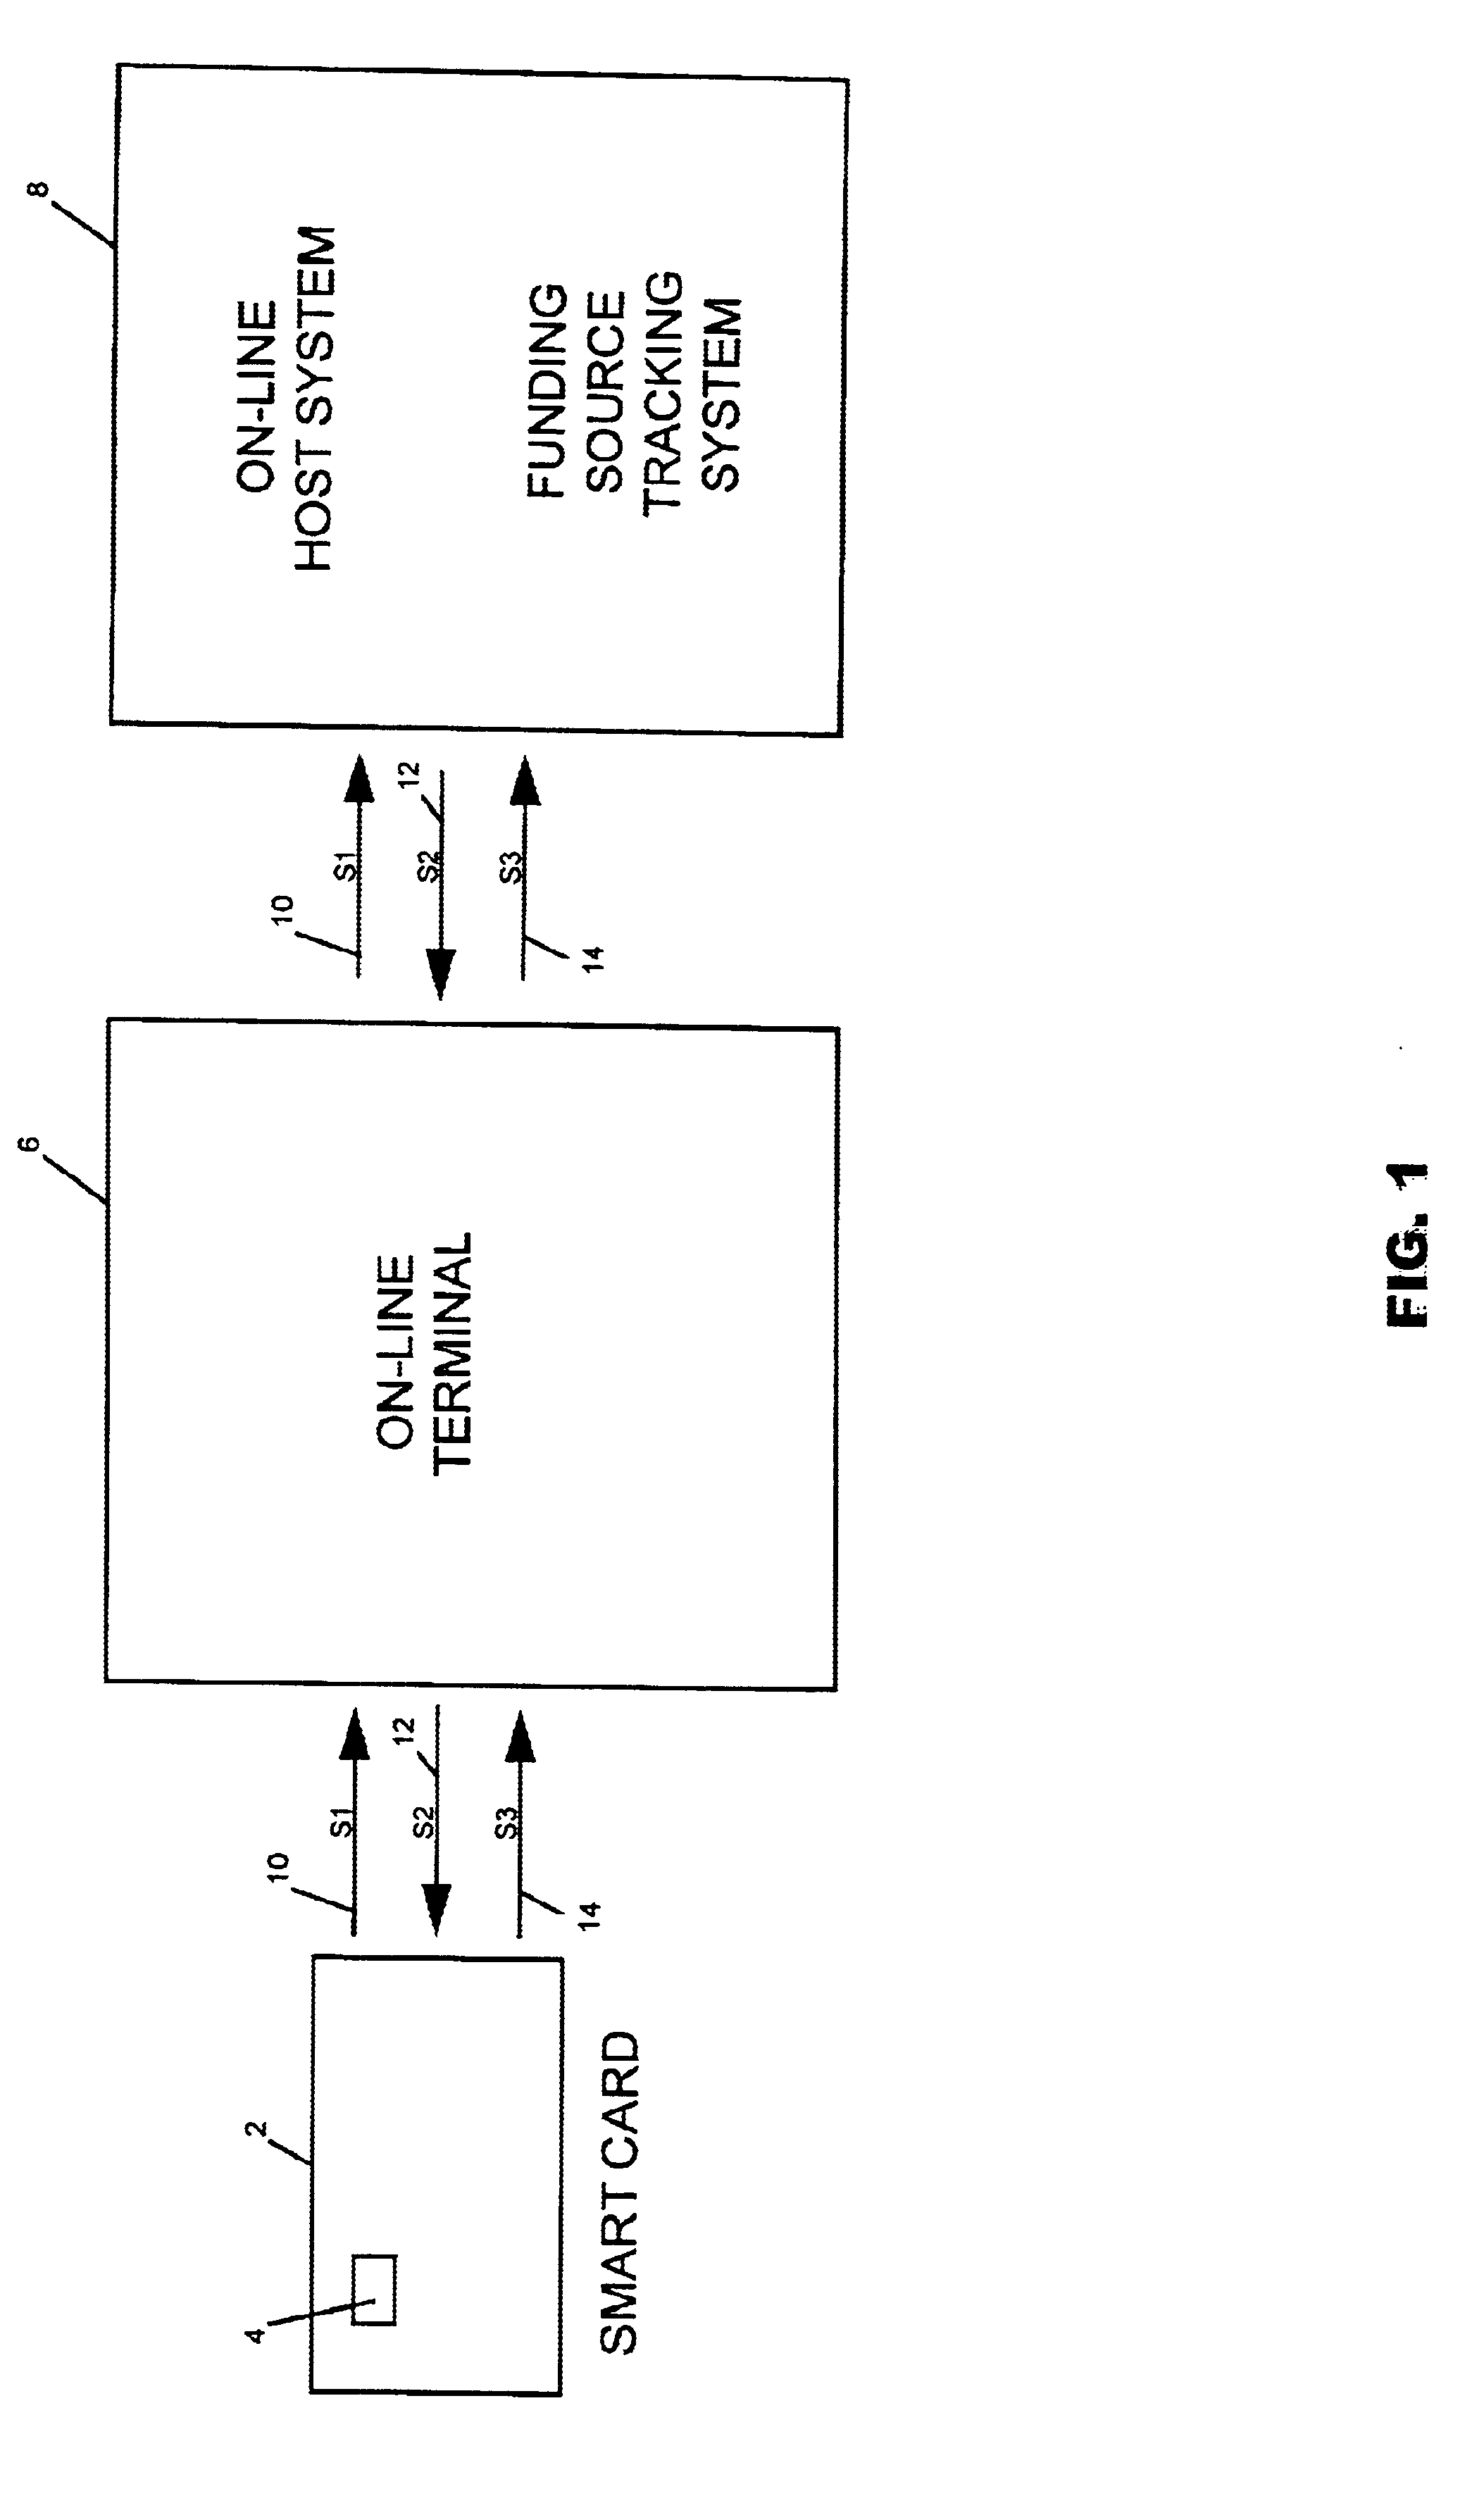 Method and system of tracking and providing an audit trail of smart card transactions